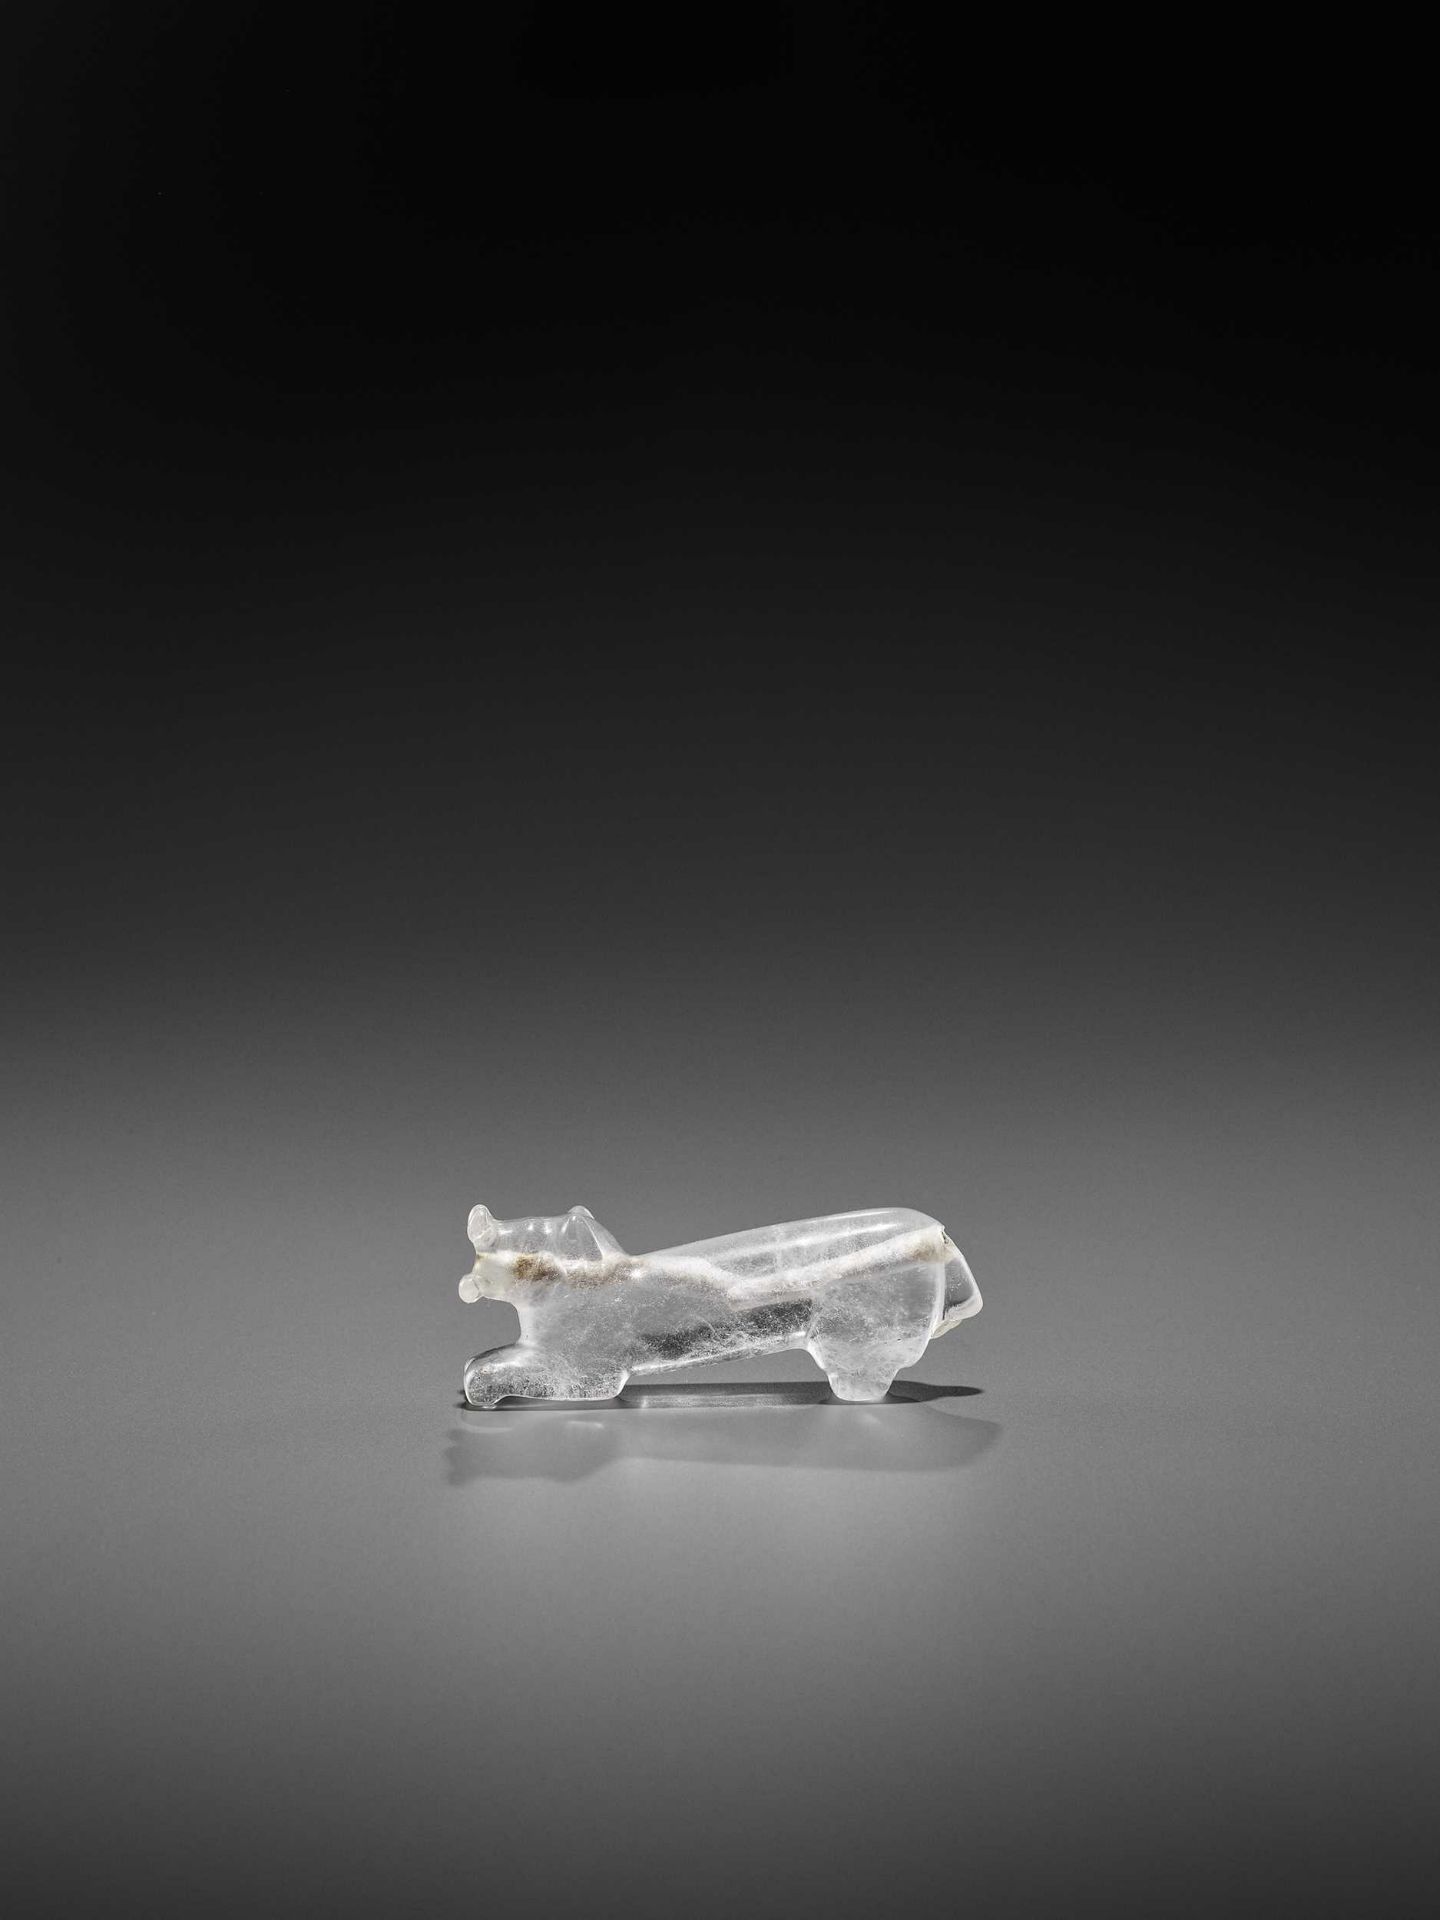 A VERY RARE PYU ROCK CRYSTAL TALISMAN DEPICTING A TIGER WITH CUB IN ITS MOUTH - Bild 2 aus 8